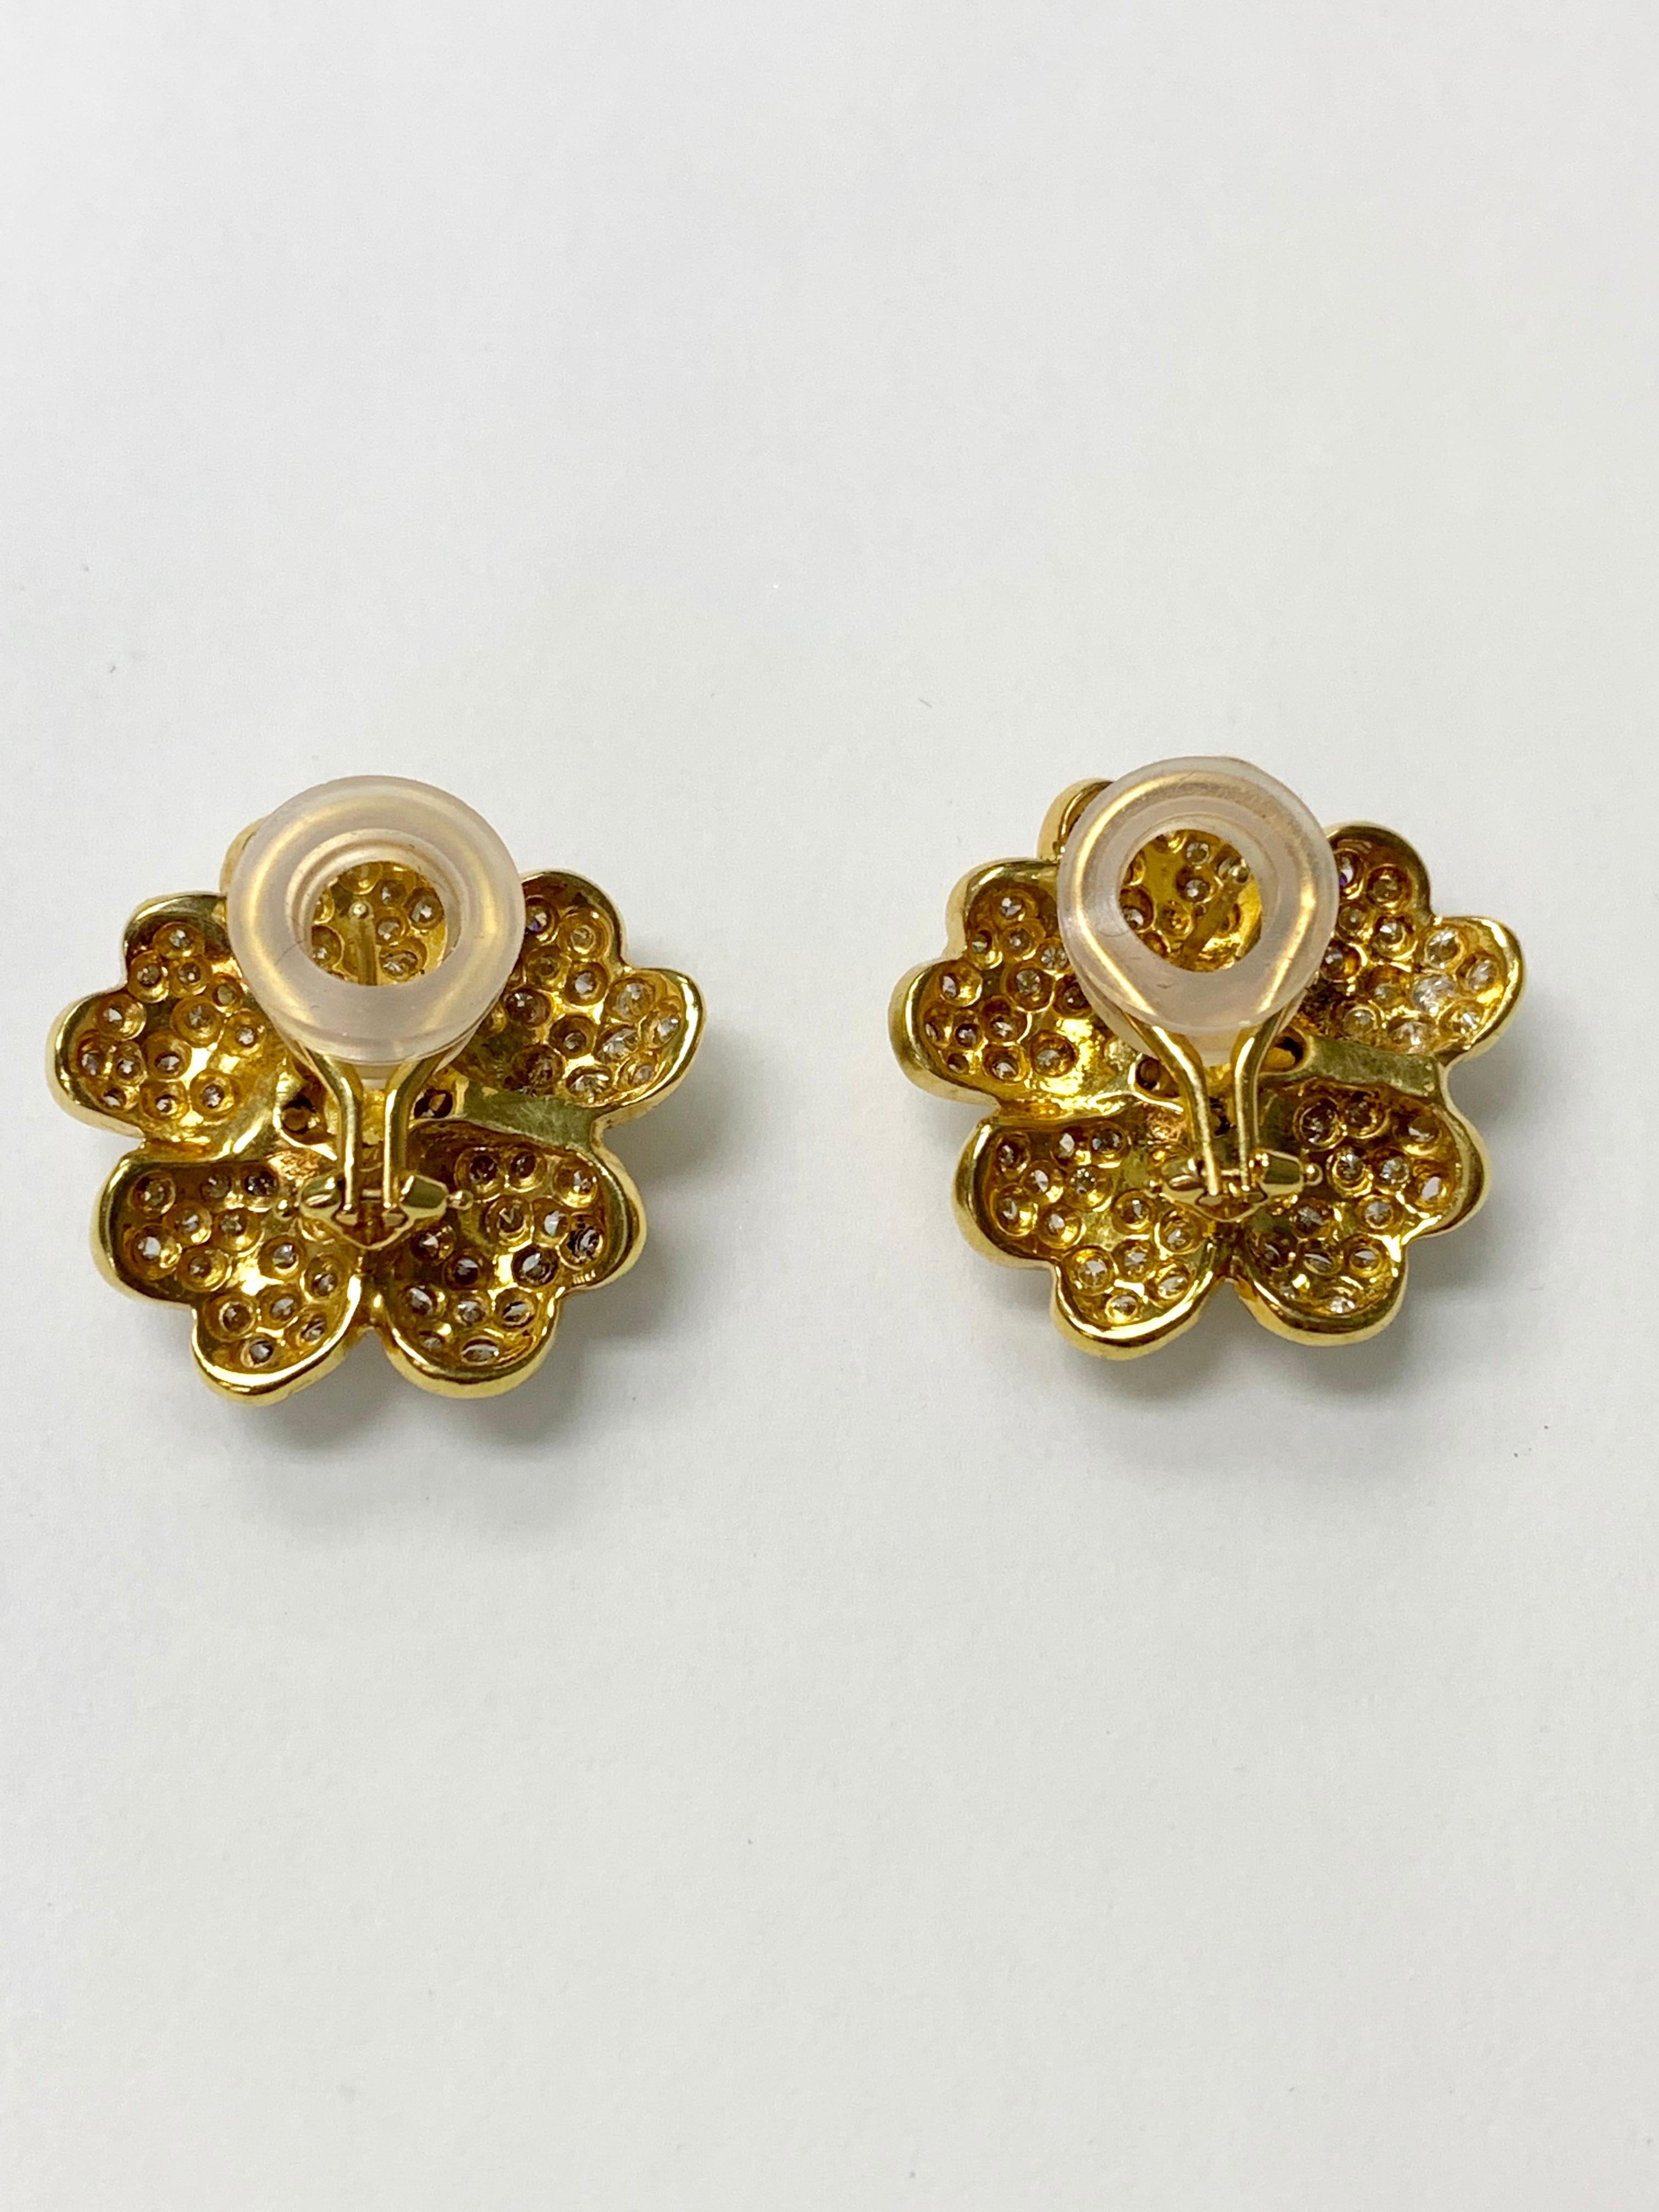 Diamond Flower Stud Earrings in 18 Karat Yellow Gold In Excellent Condition For Sale In New York, NY